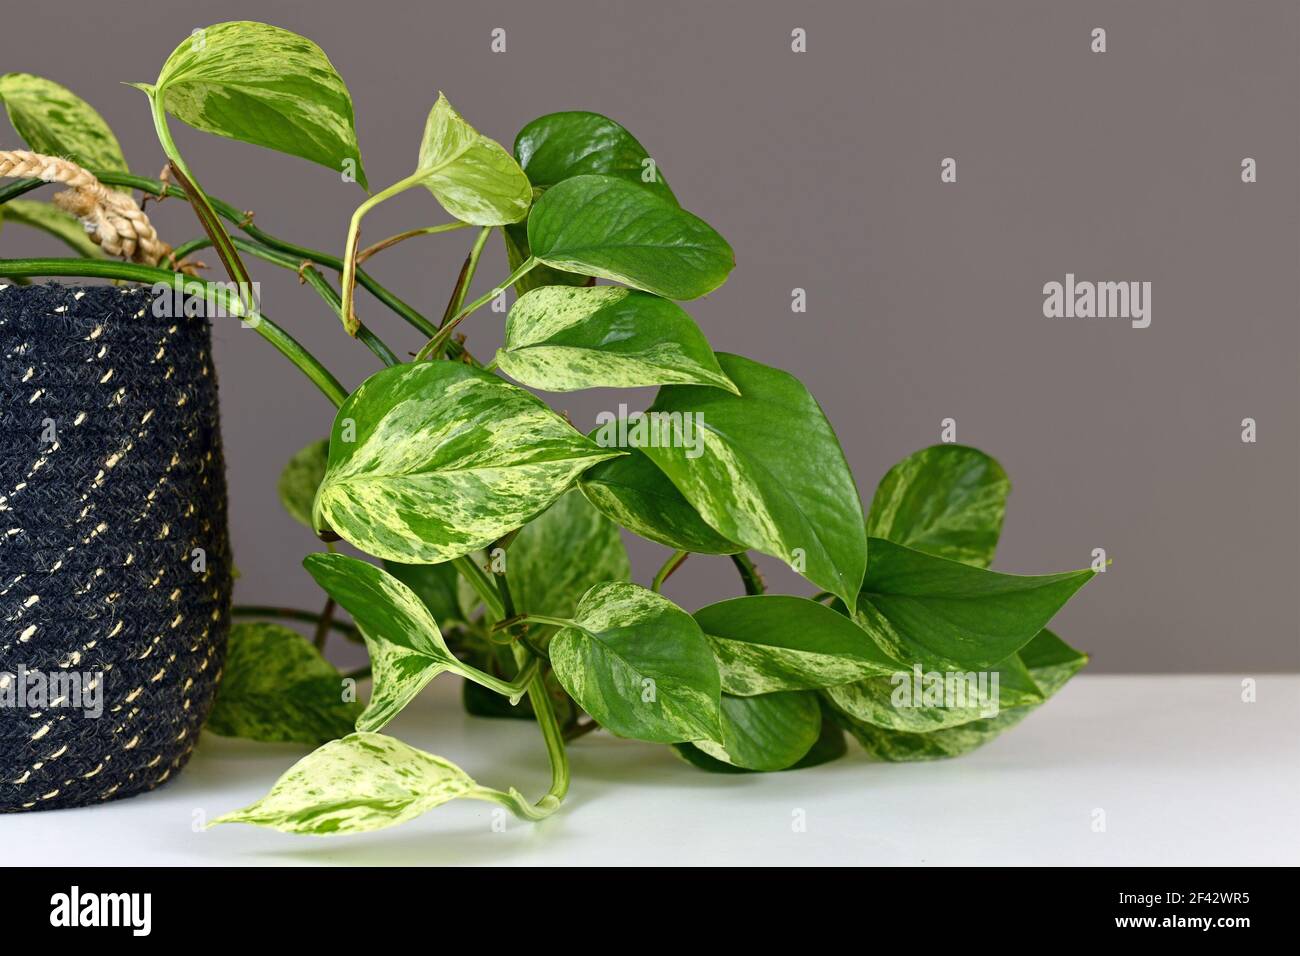 Epipremnum High Resolution Stock Photography and Images - Alamy